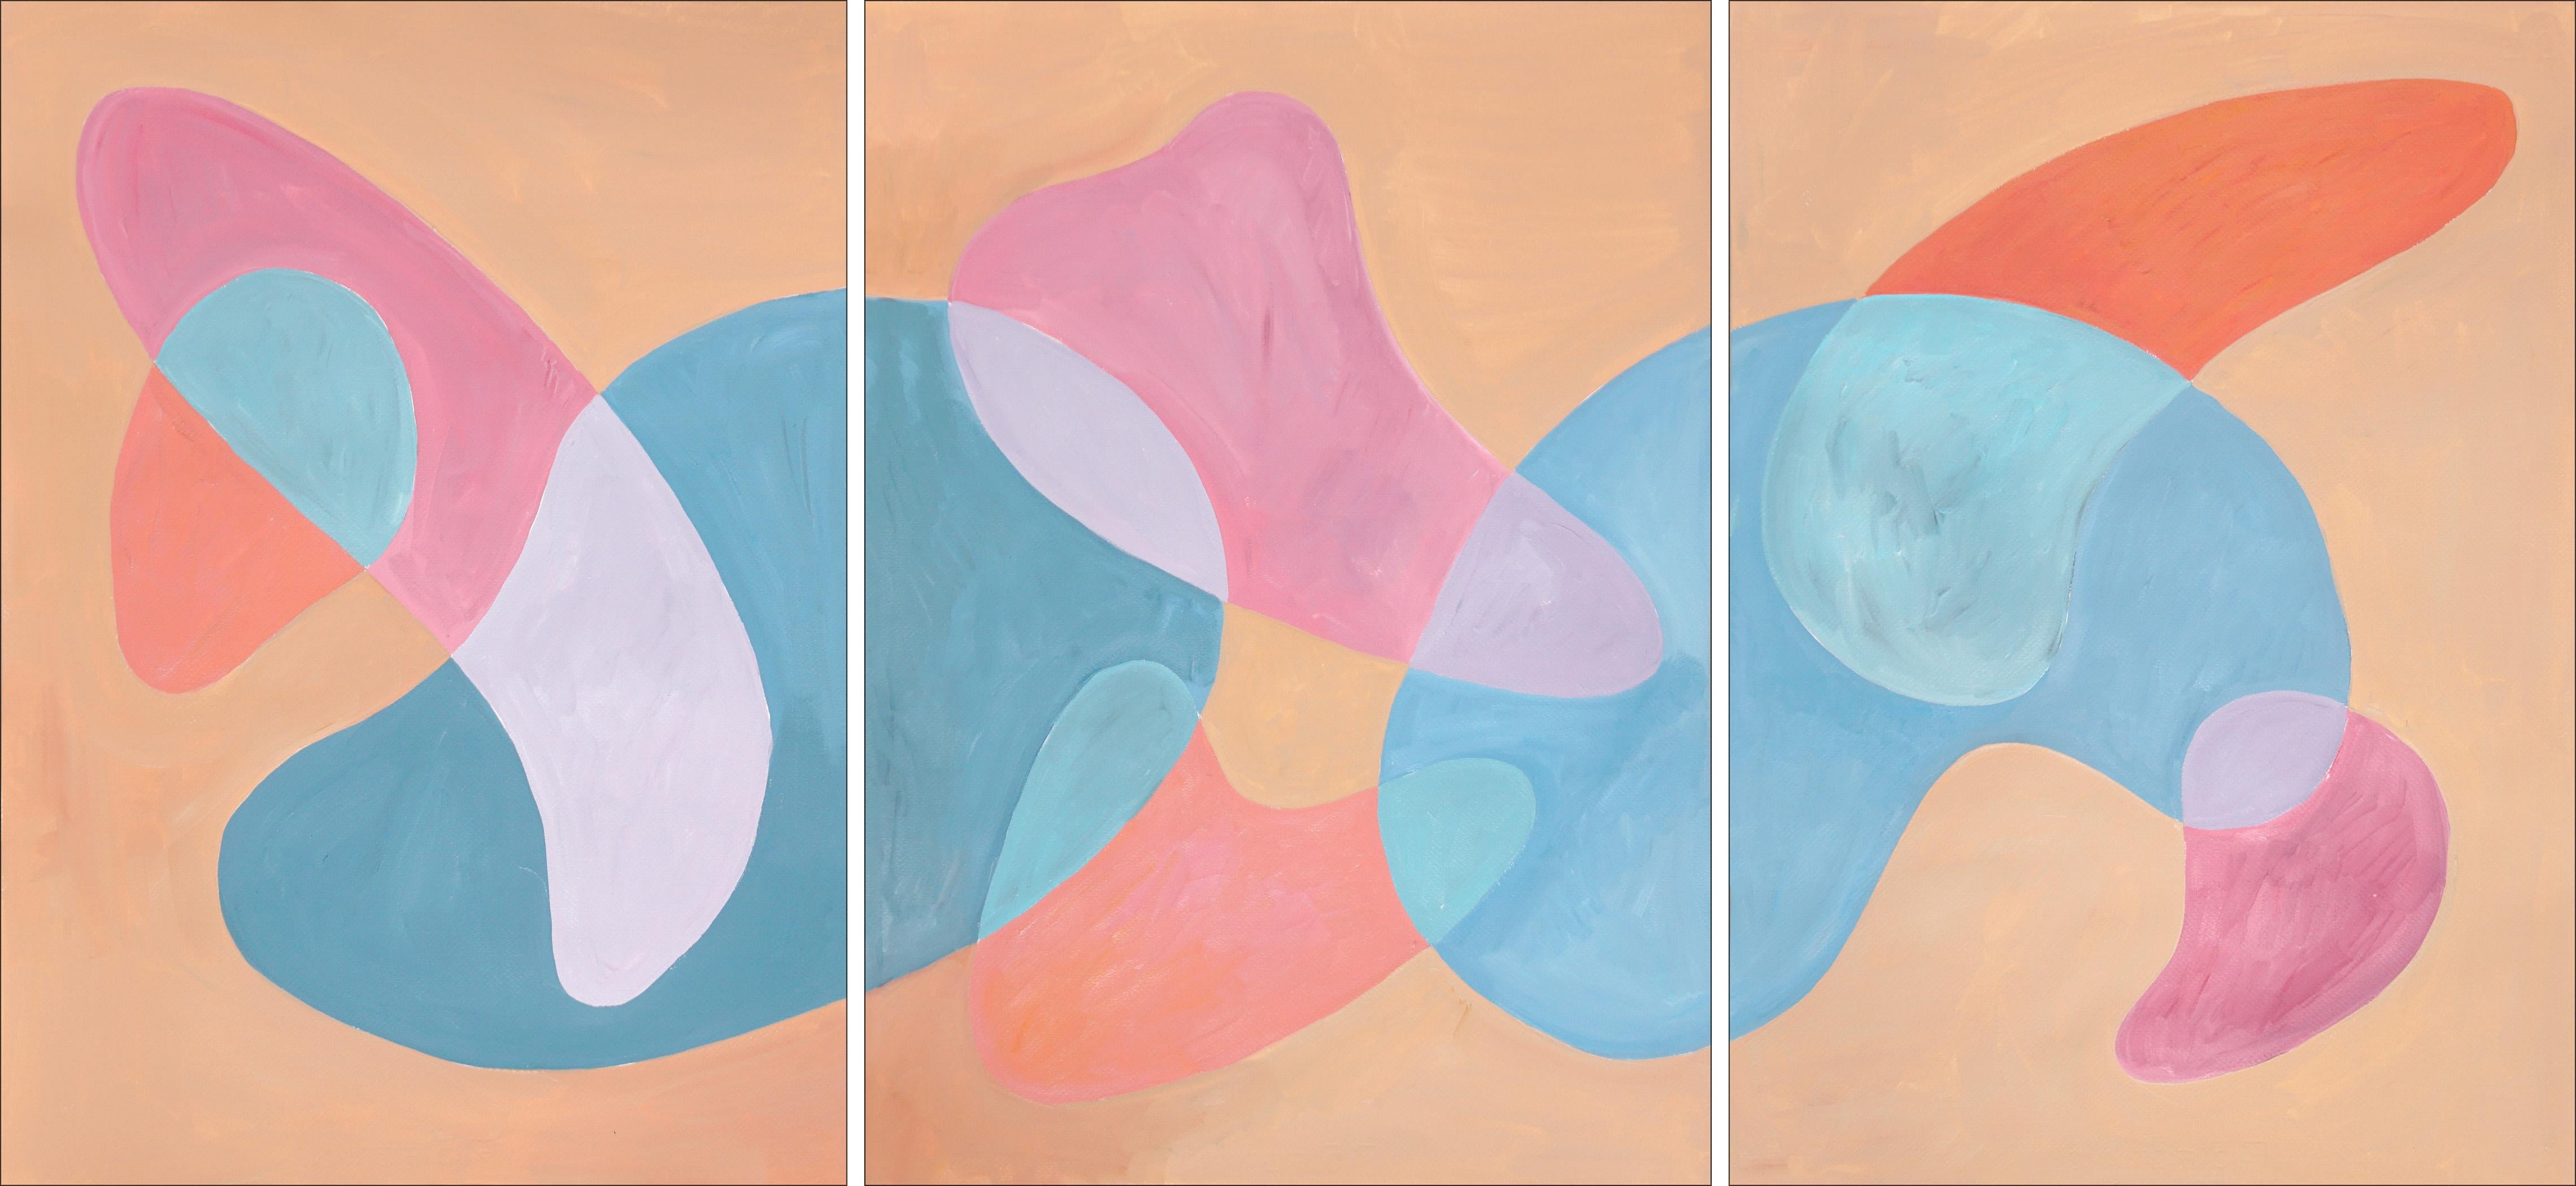 Summer Beach Puddles, Coral Tones, Turquoise Kidney Pools, Abstract Modern Forms